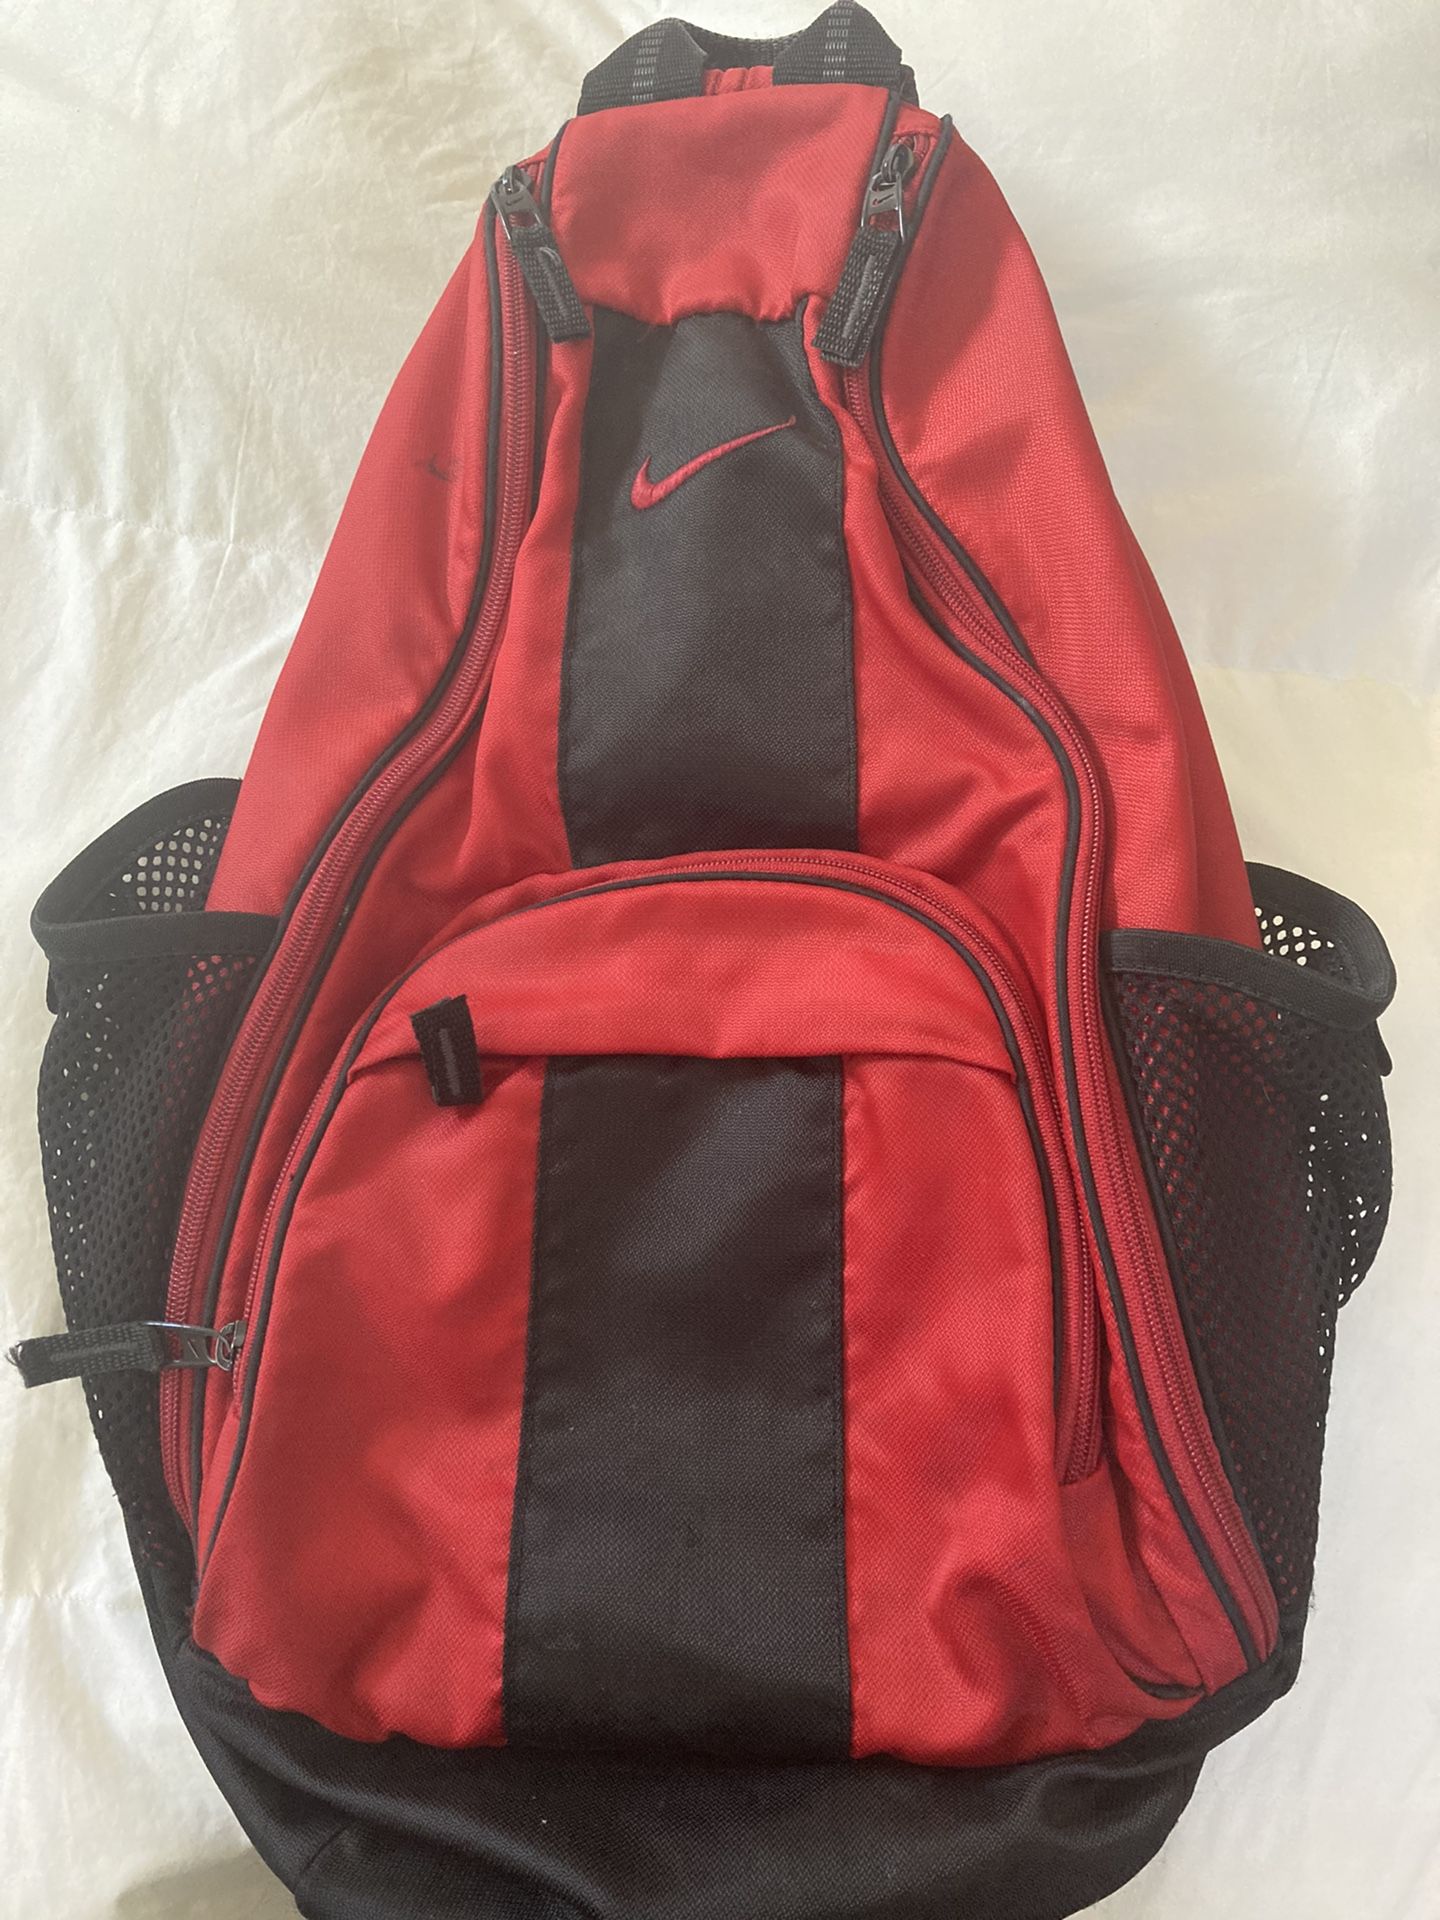 Nike Backpack. No Rips Or Tears. No Cosmetic Damage. 